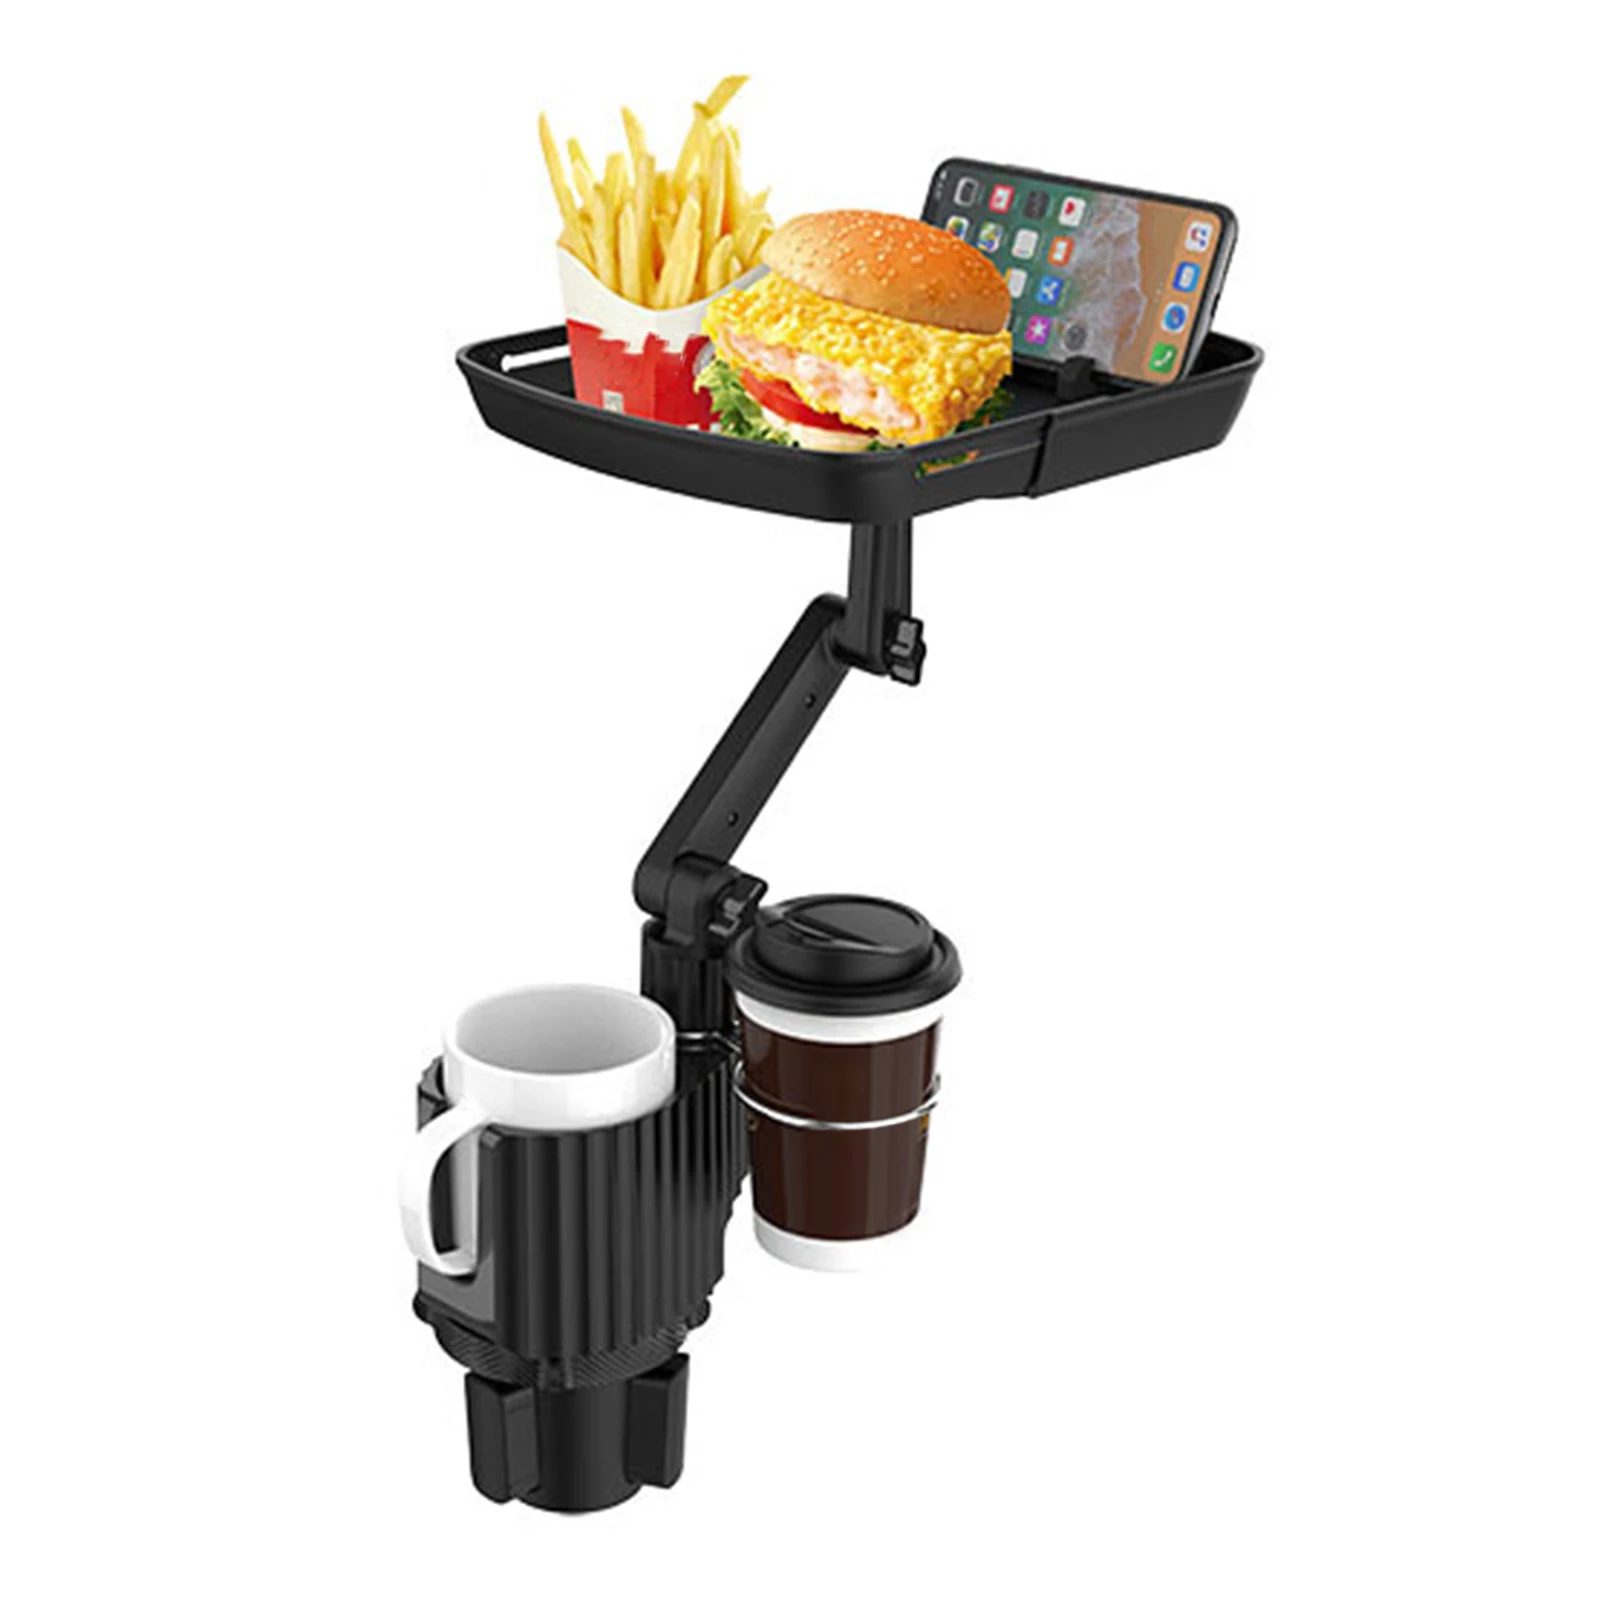 

Cup Holder Expander Adjustable Car Tray Table With Swivel Arm 360 Degree Adjustable Car Trays For Eating Food Road Trip Car